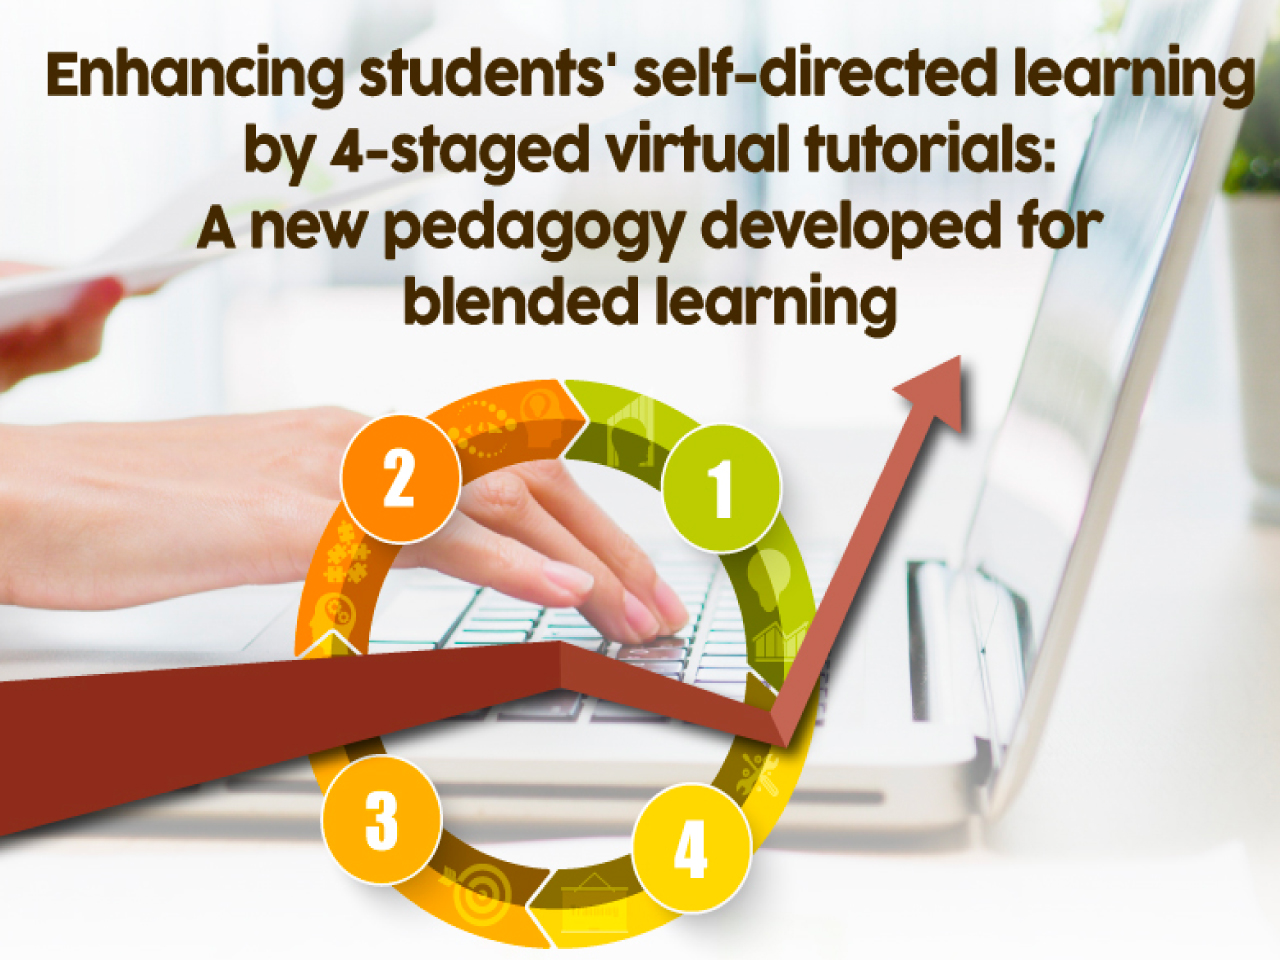 Enhancing students' self-directed learning by 4-staged virtual tutorials: A new pedagogy